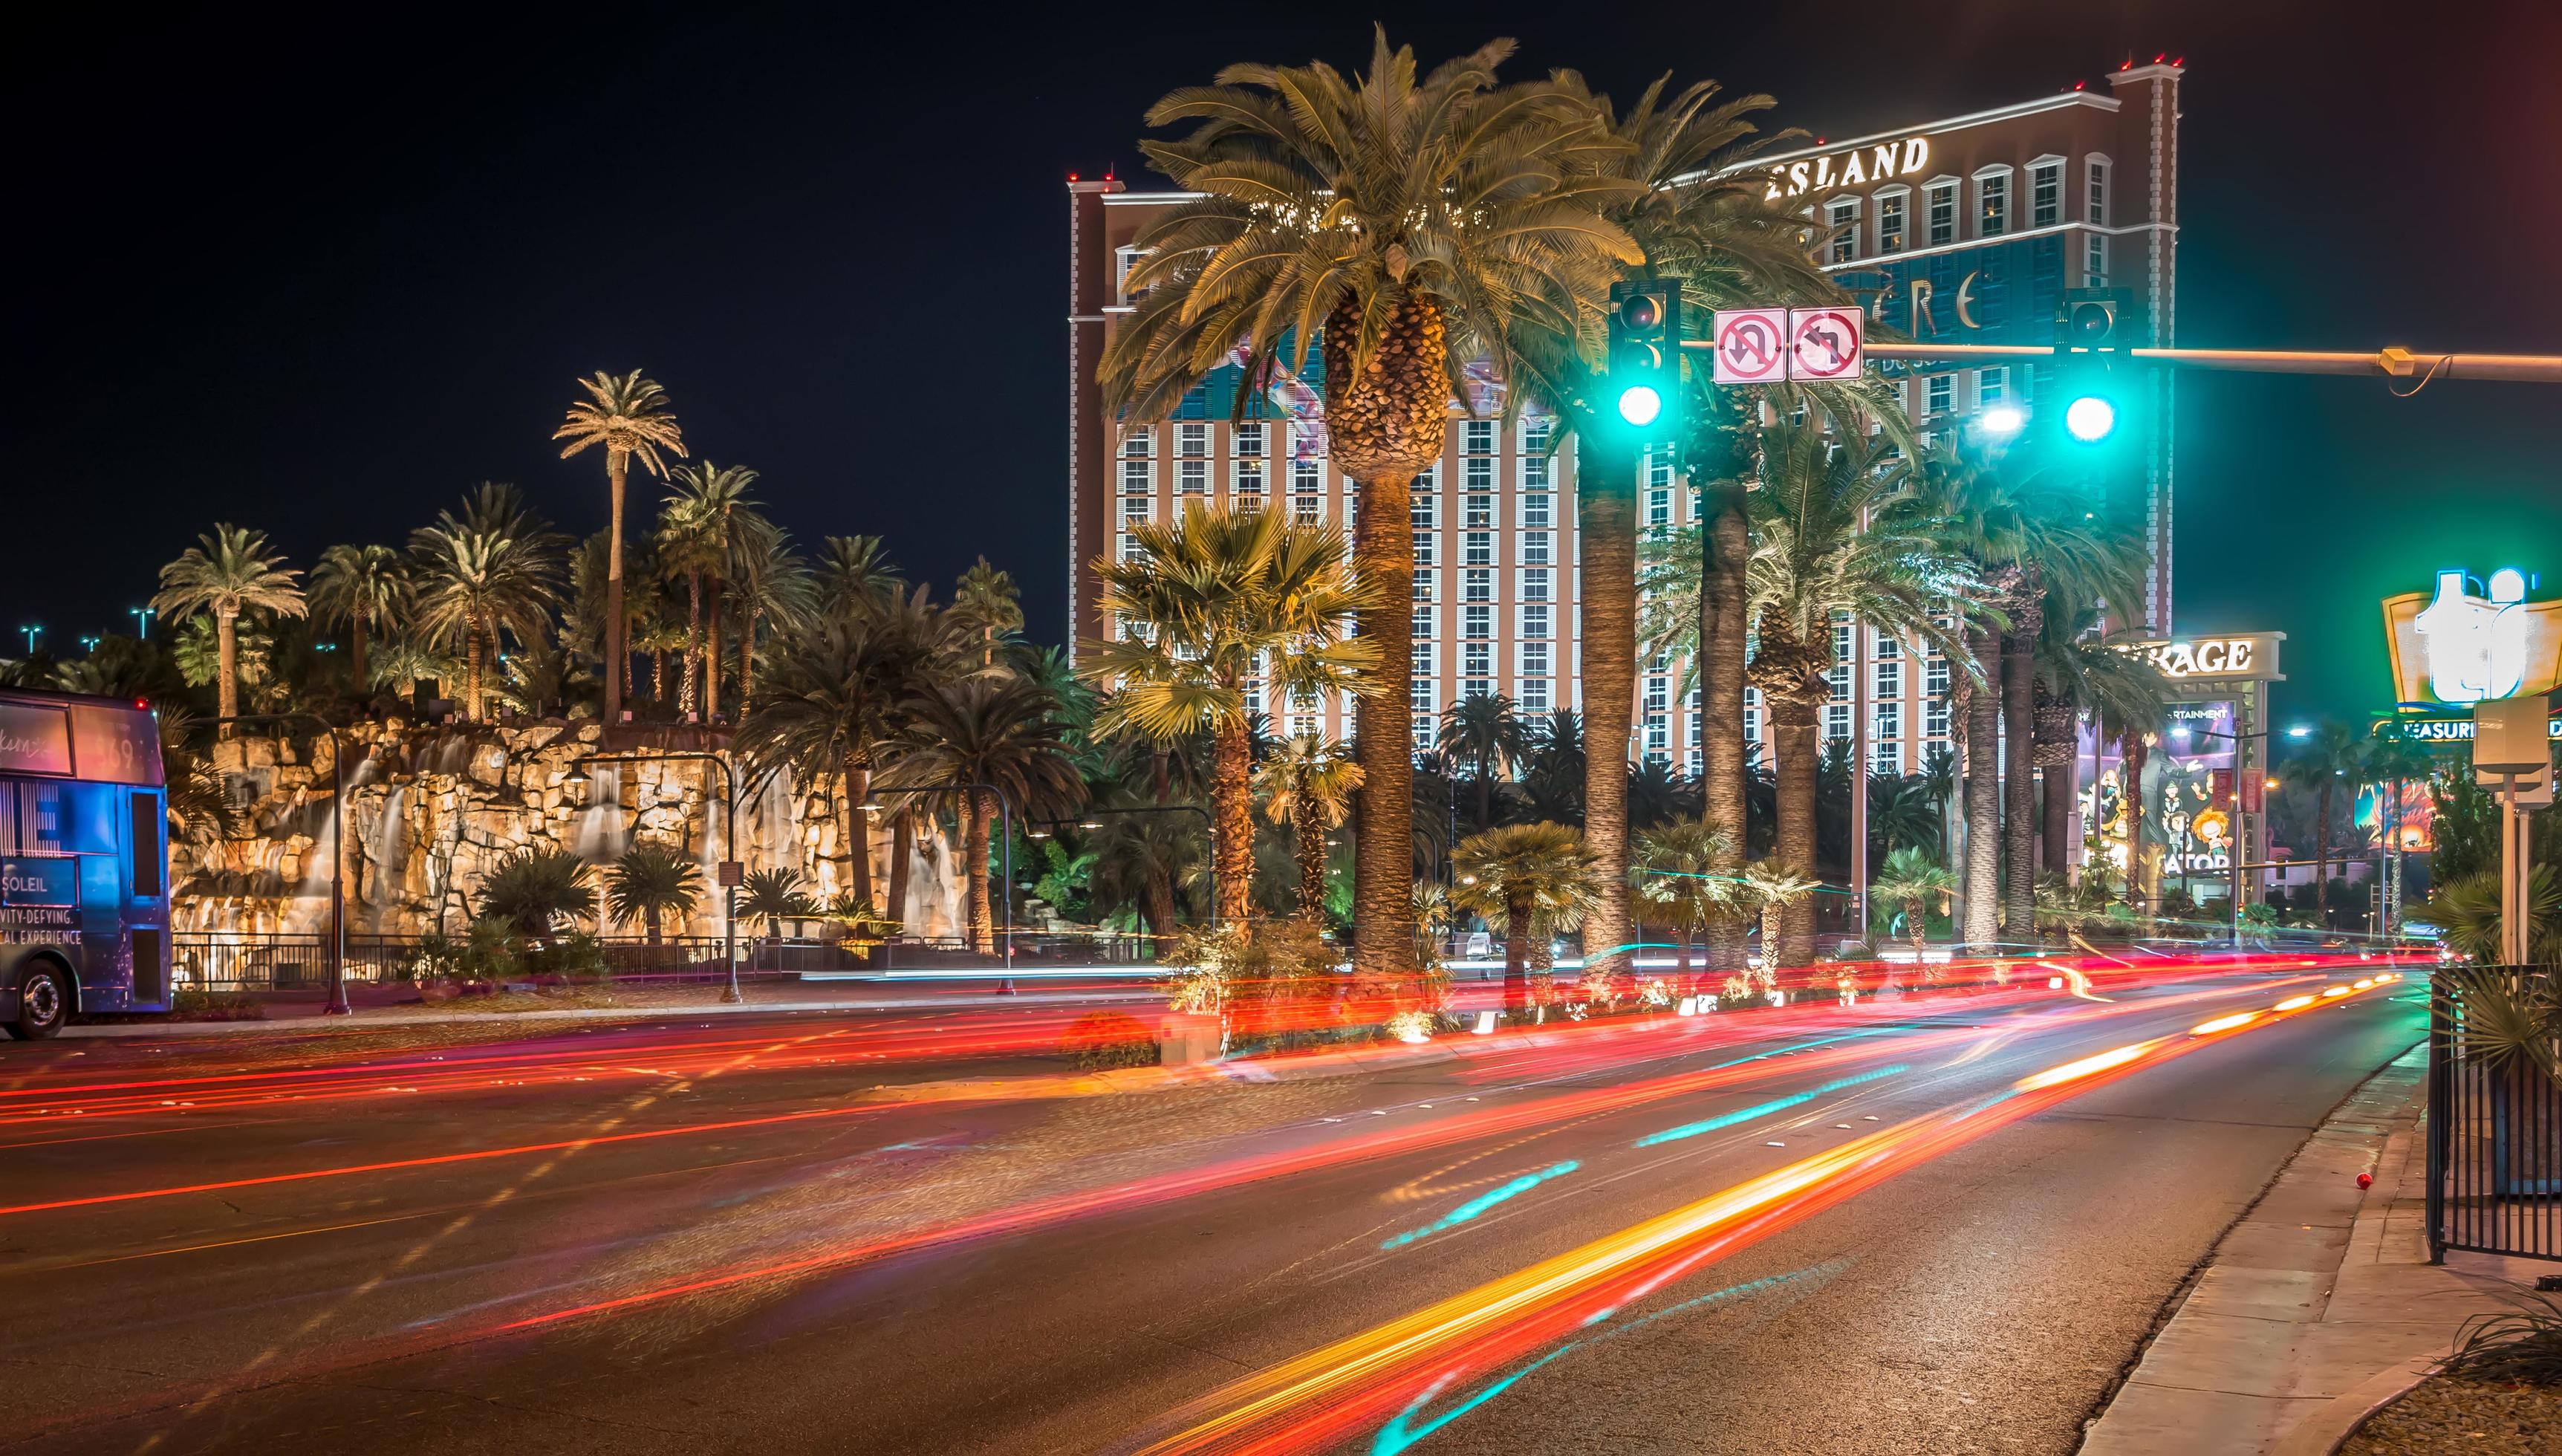 A busy street in Las Vegas at night with traffic lights and palm trees. - Las Vegas